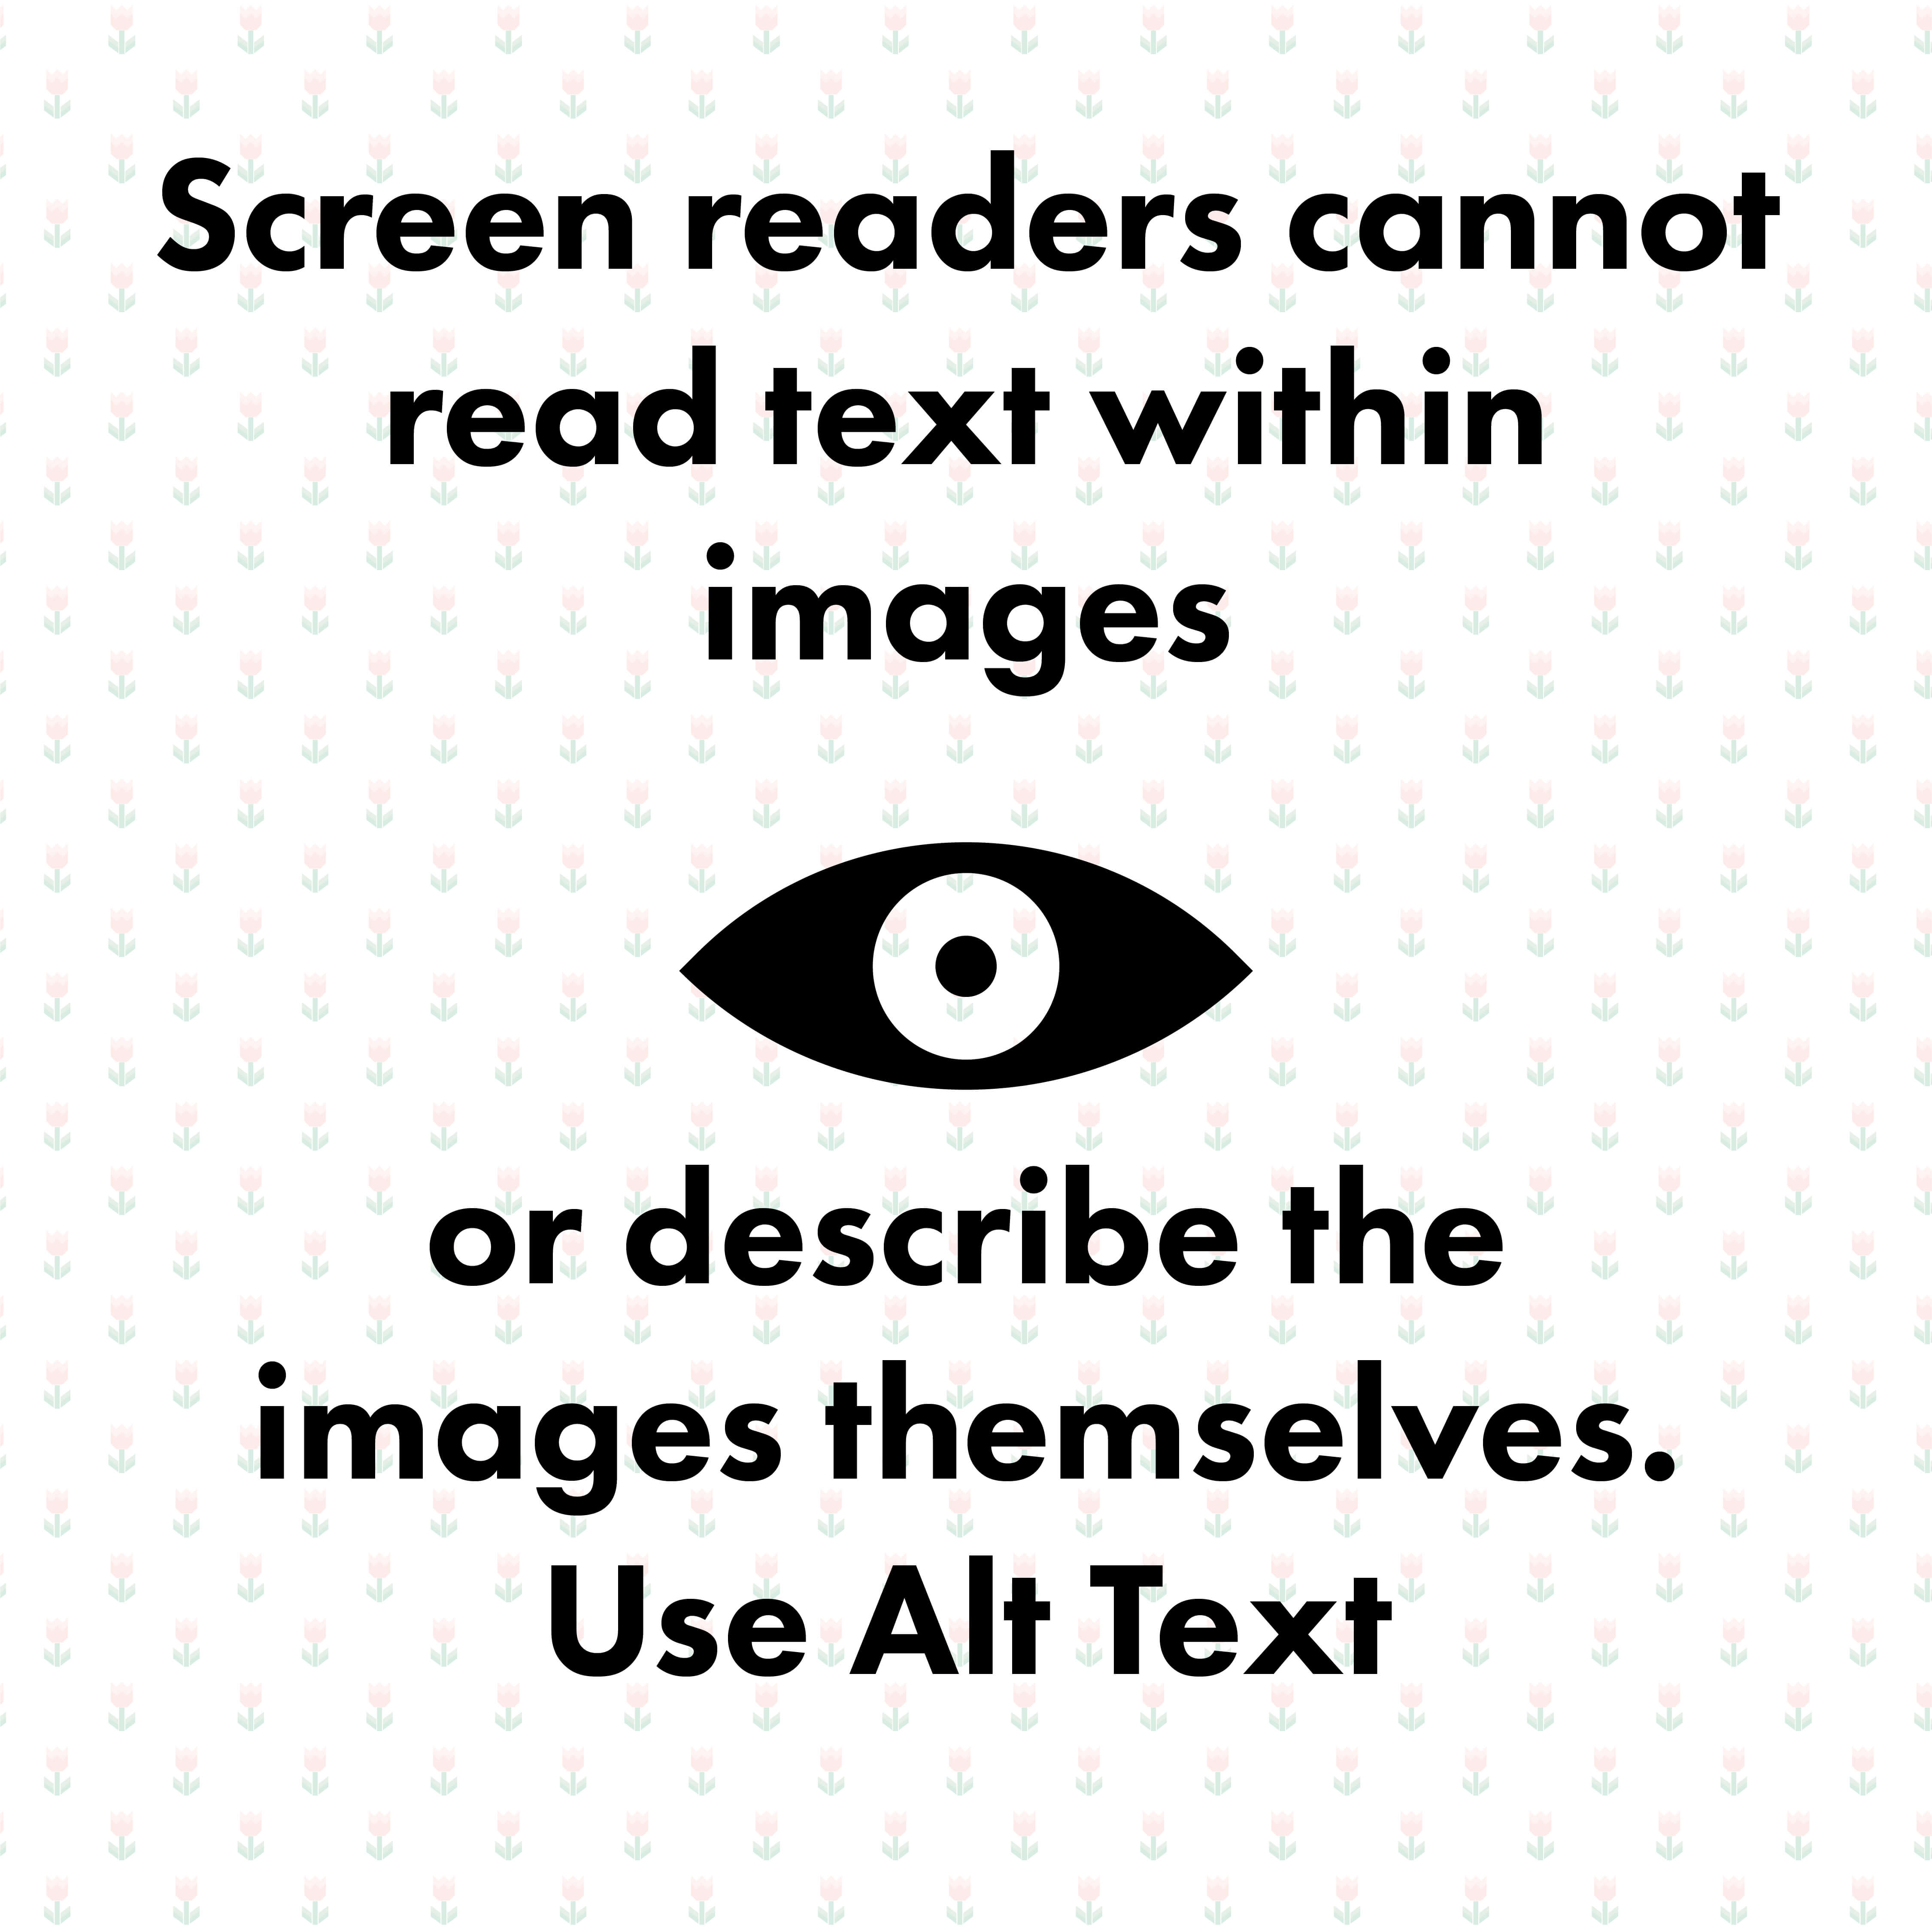 The words: Screen readers cannot read text within images or describe the images themselves, use alt text surrounding an icon of an eye. Opaque flower background.